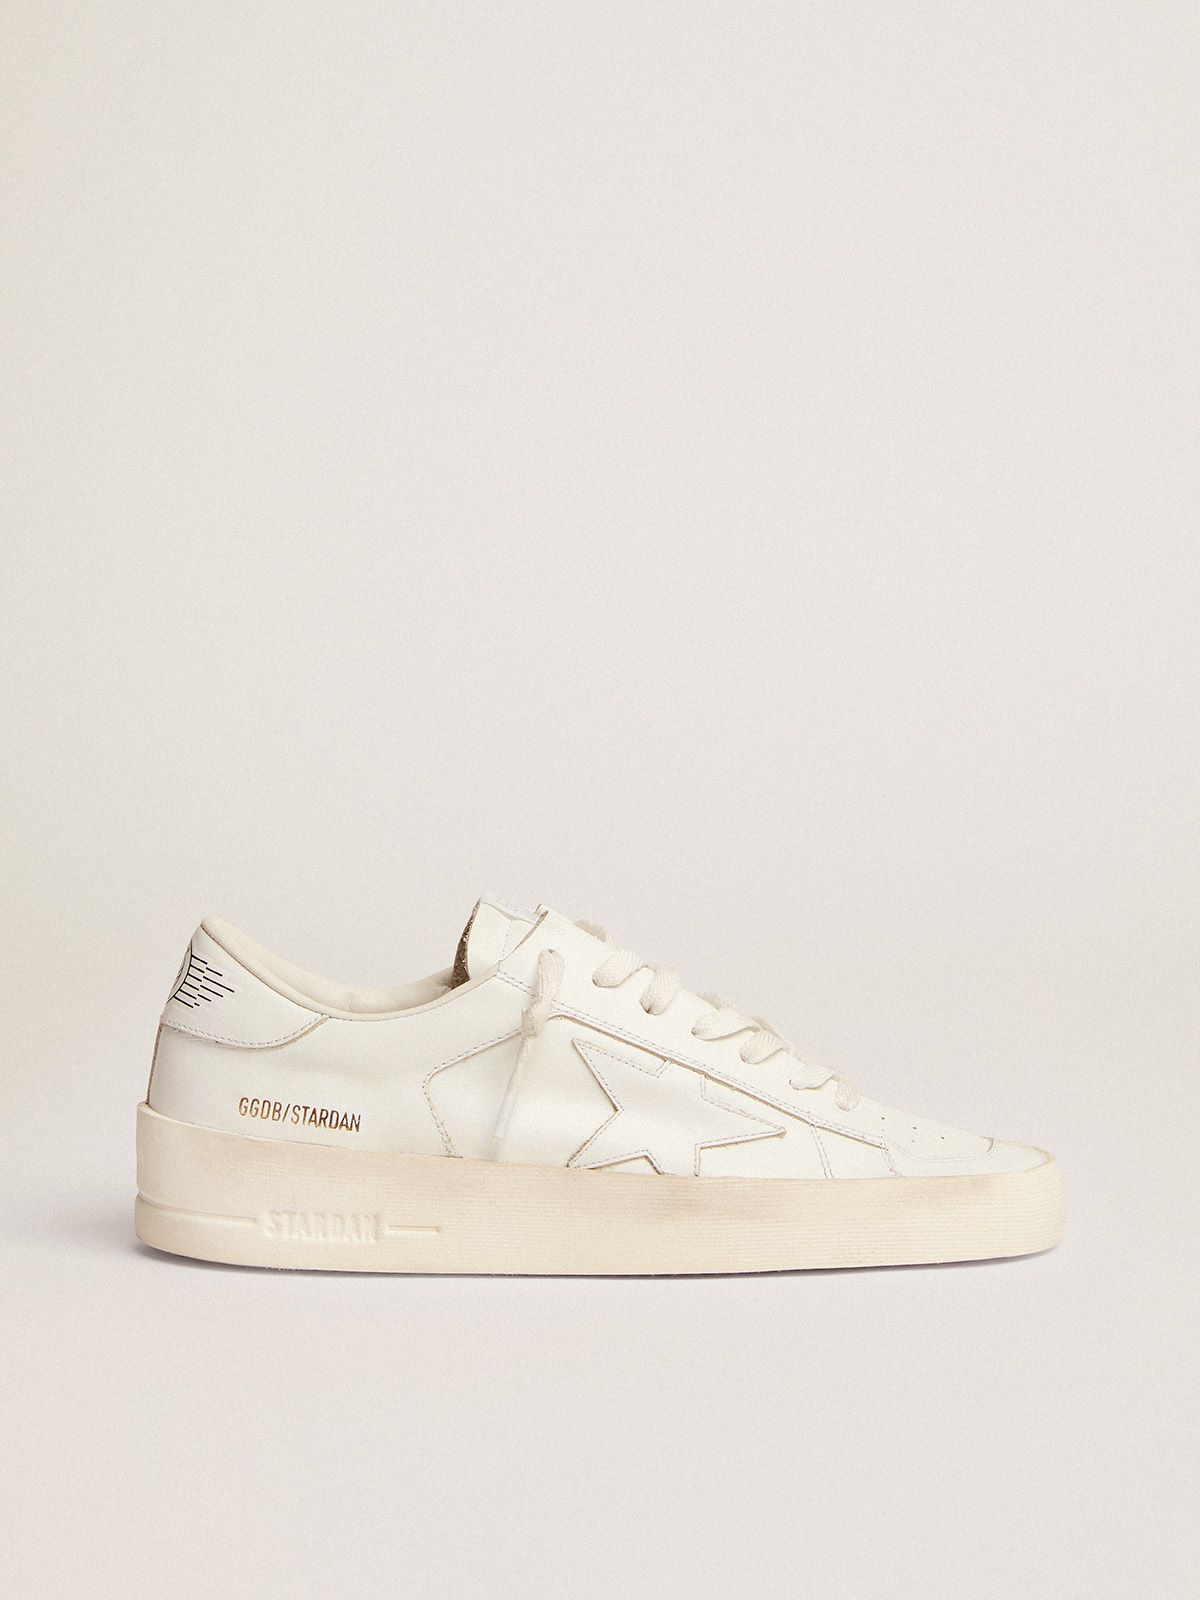 golden goose white in Stardan leather sneakers total